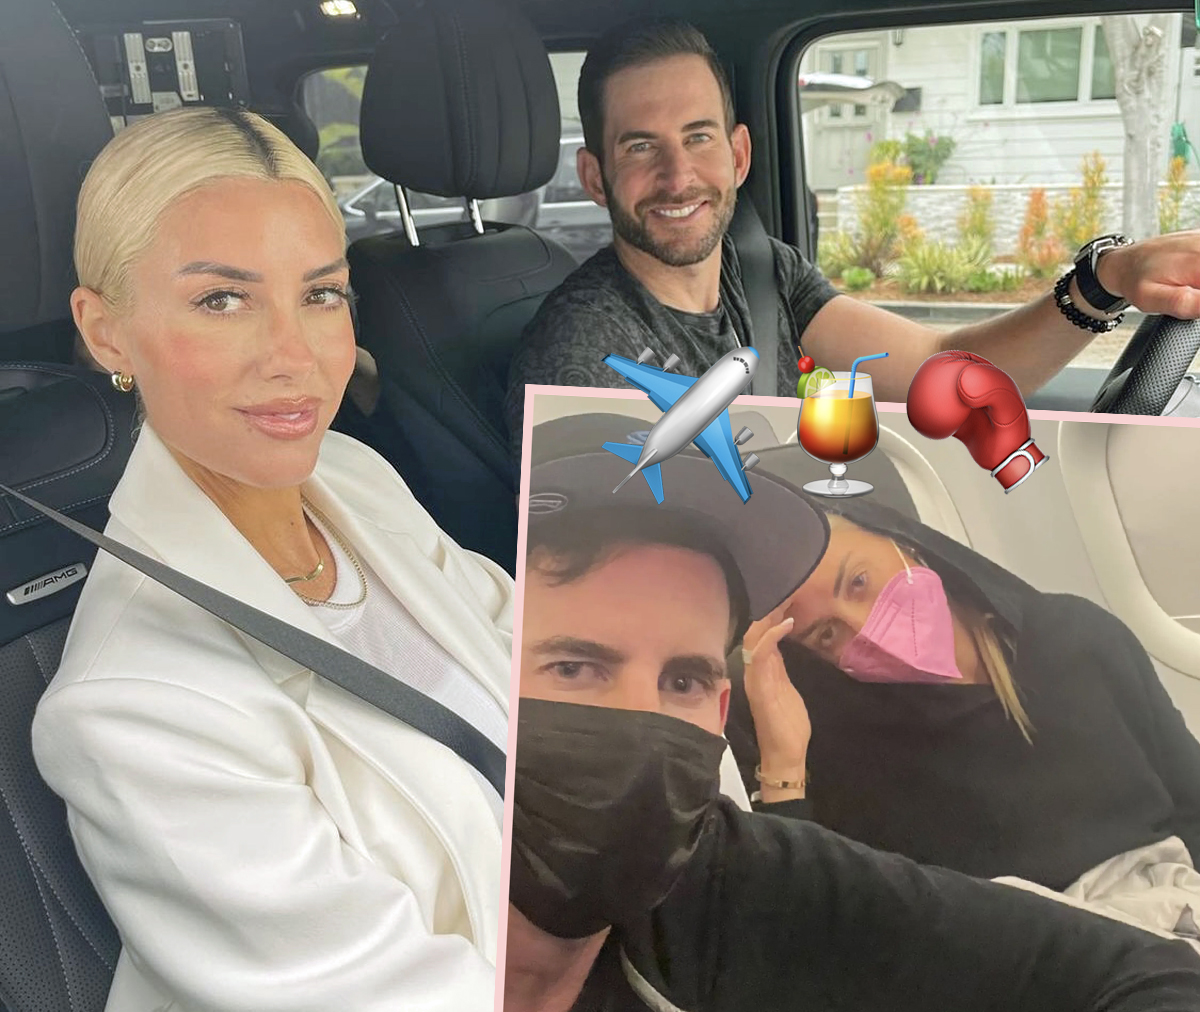 #Heather Rae Young Calls Tarek El Moussa ‘Heroic’ After He Helped Stop INTENSE Airplane Altercation Amid Day ‘From Hell’!